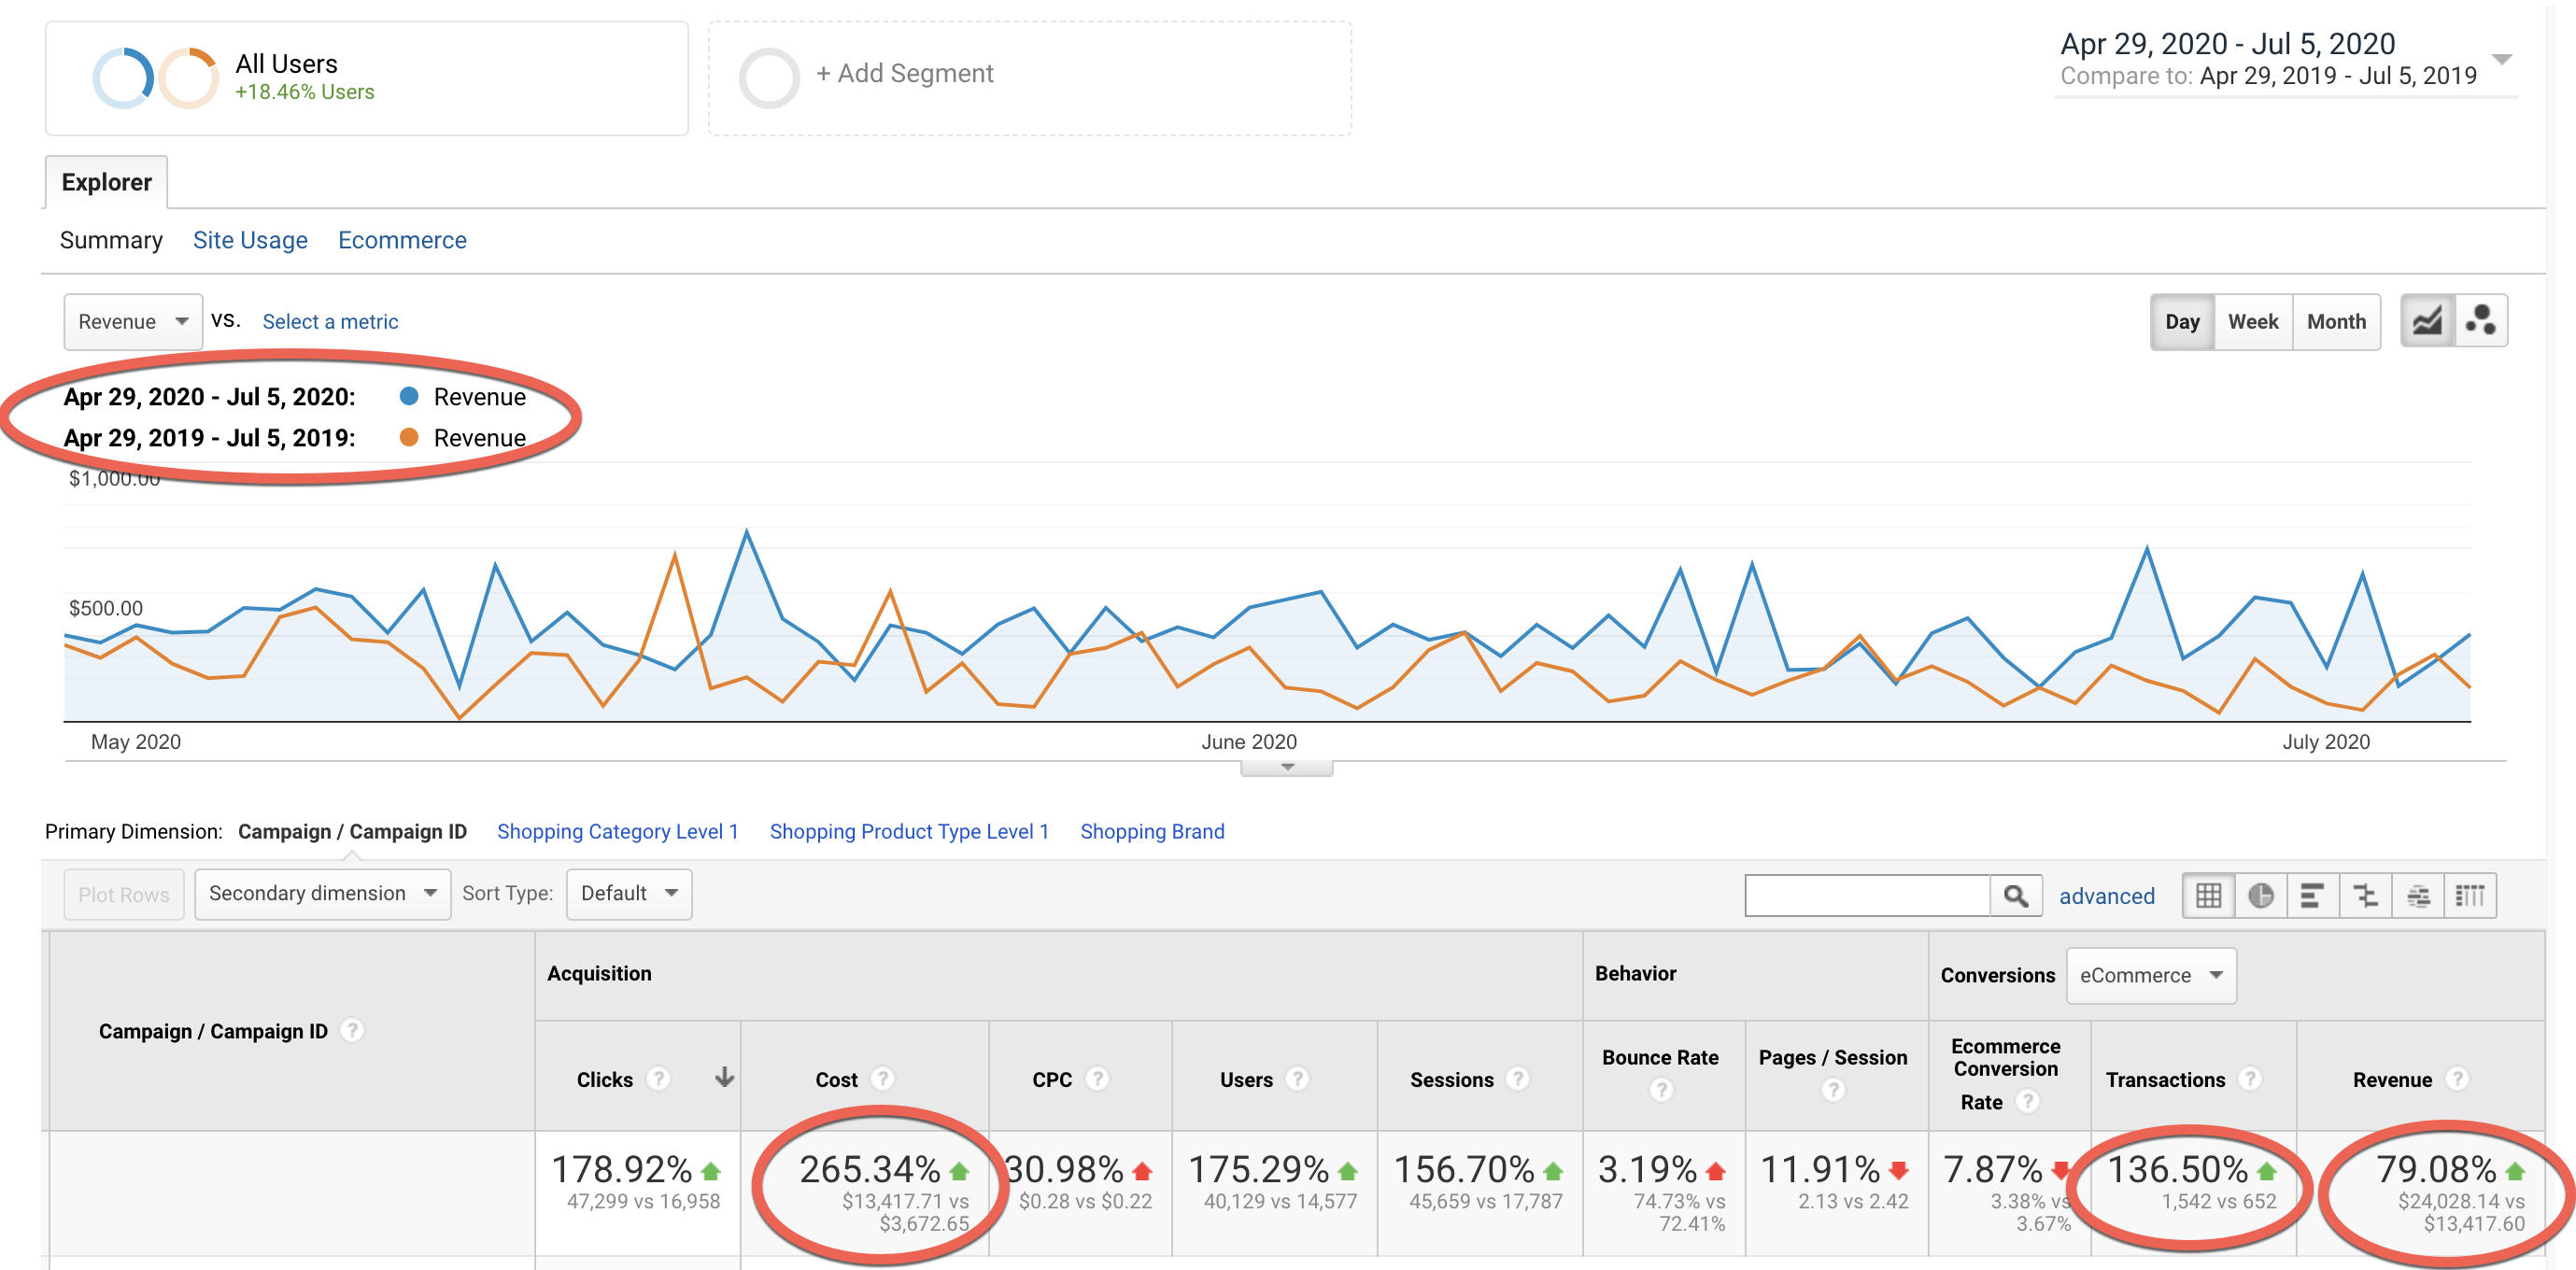 Changes to PPC costs, transactions and revenue